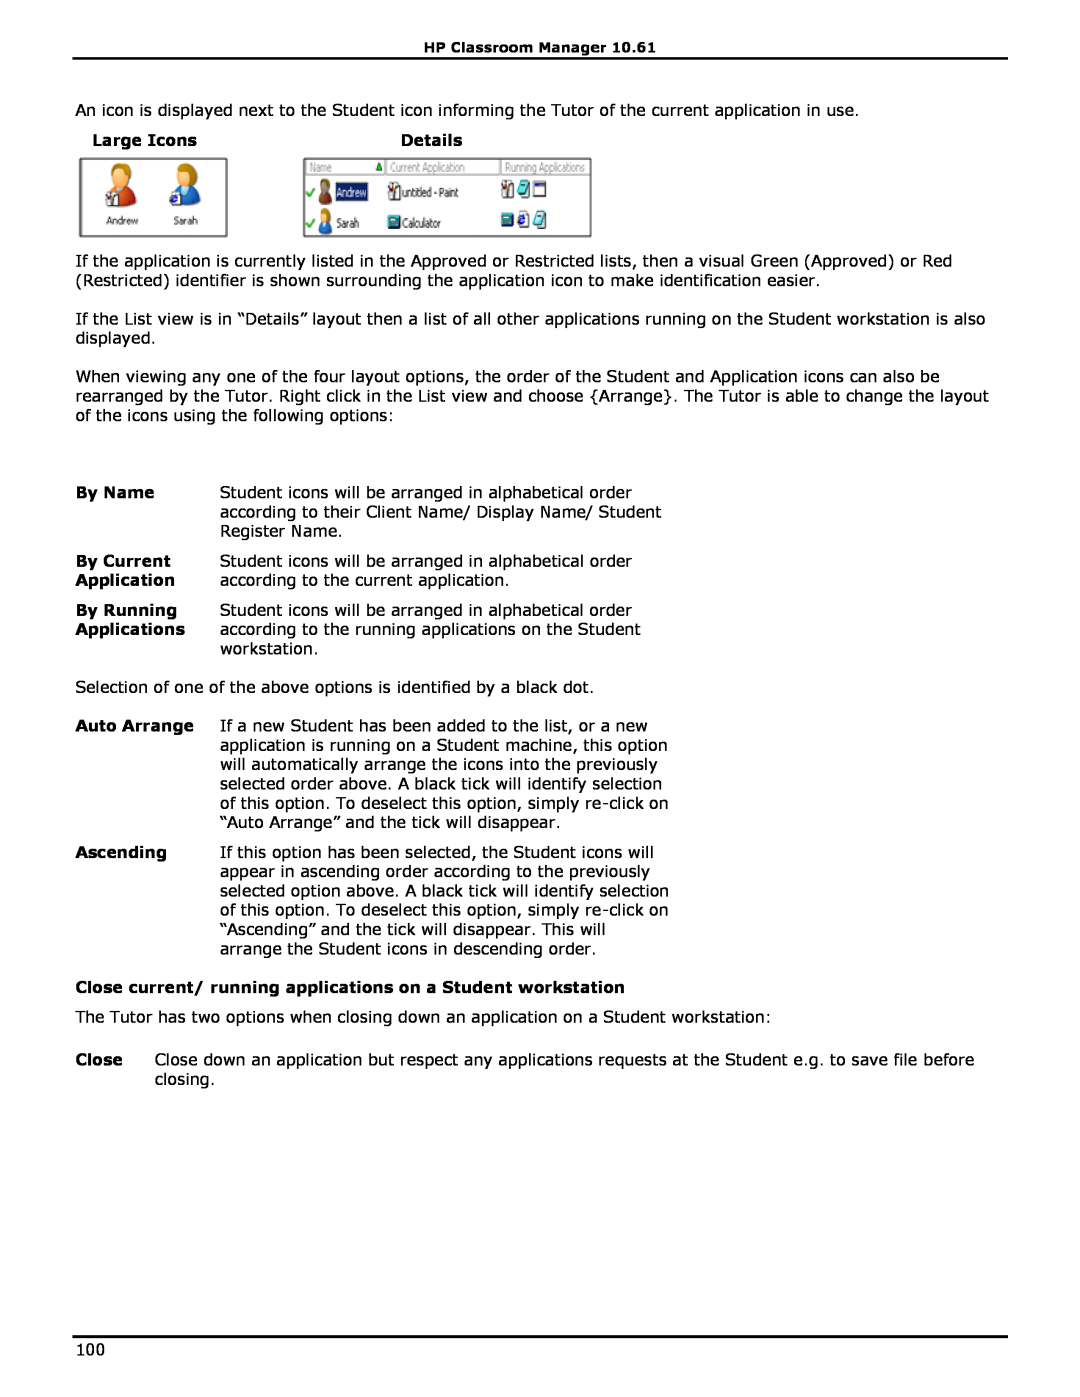 HP Classroom Manager manual Close current/ running applications on a Student workstation, Large Icons, Details 